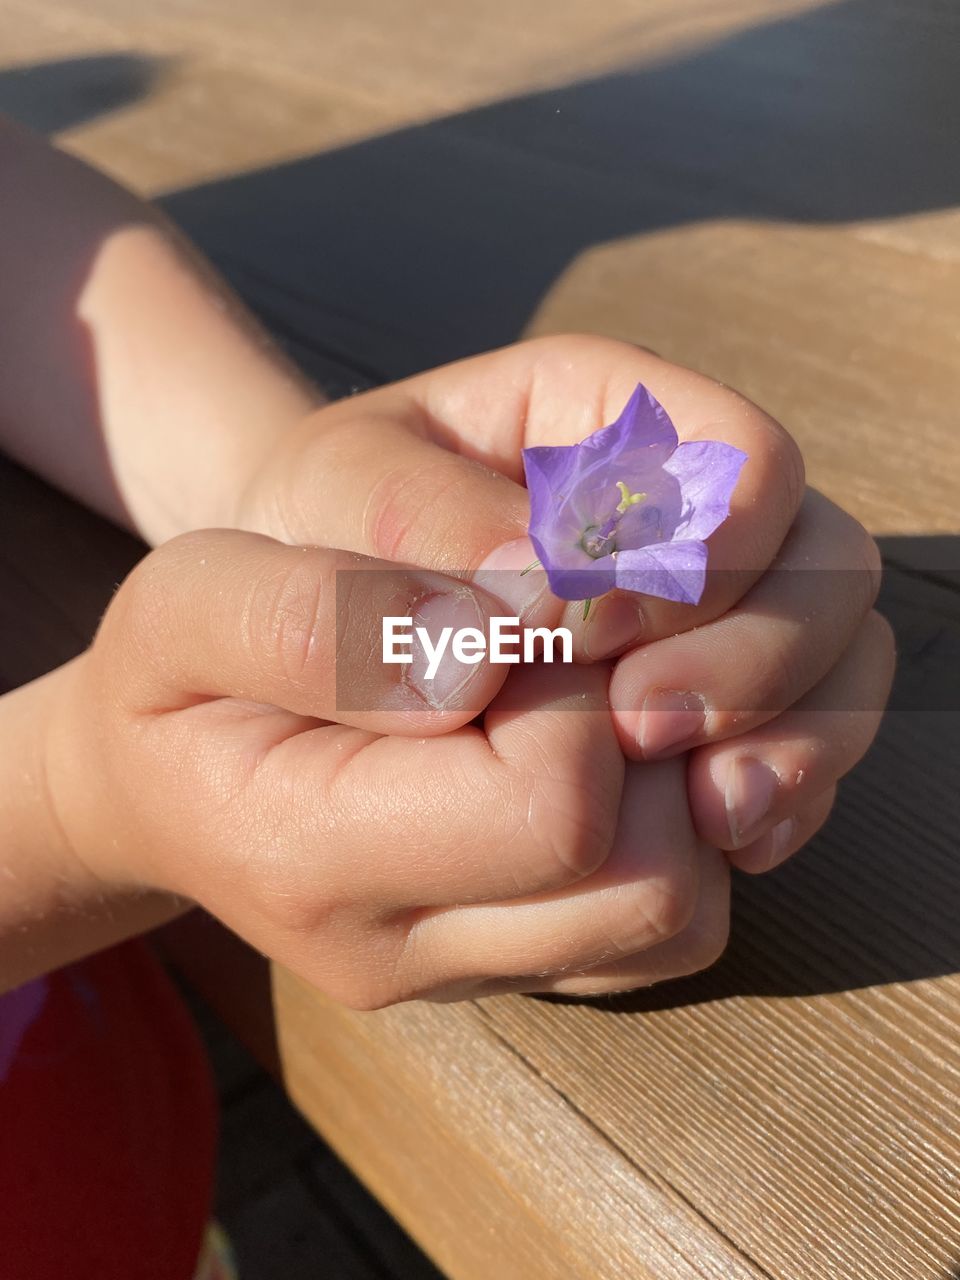 HIGH ANGLE VIEW OF PERSON HAND HOLDING PURPLE FLOWER